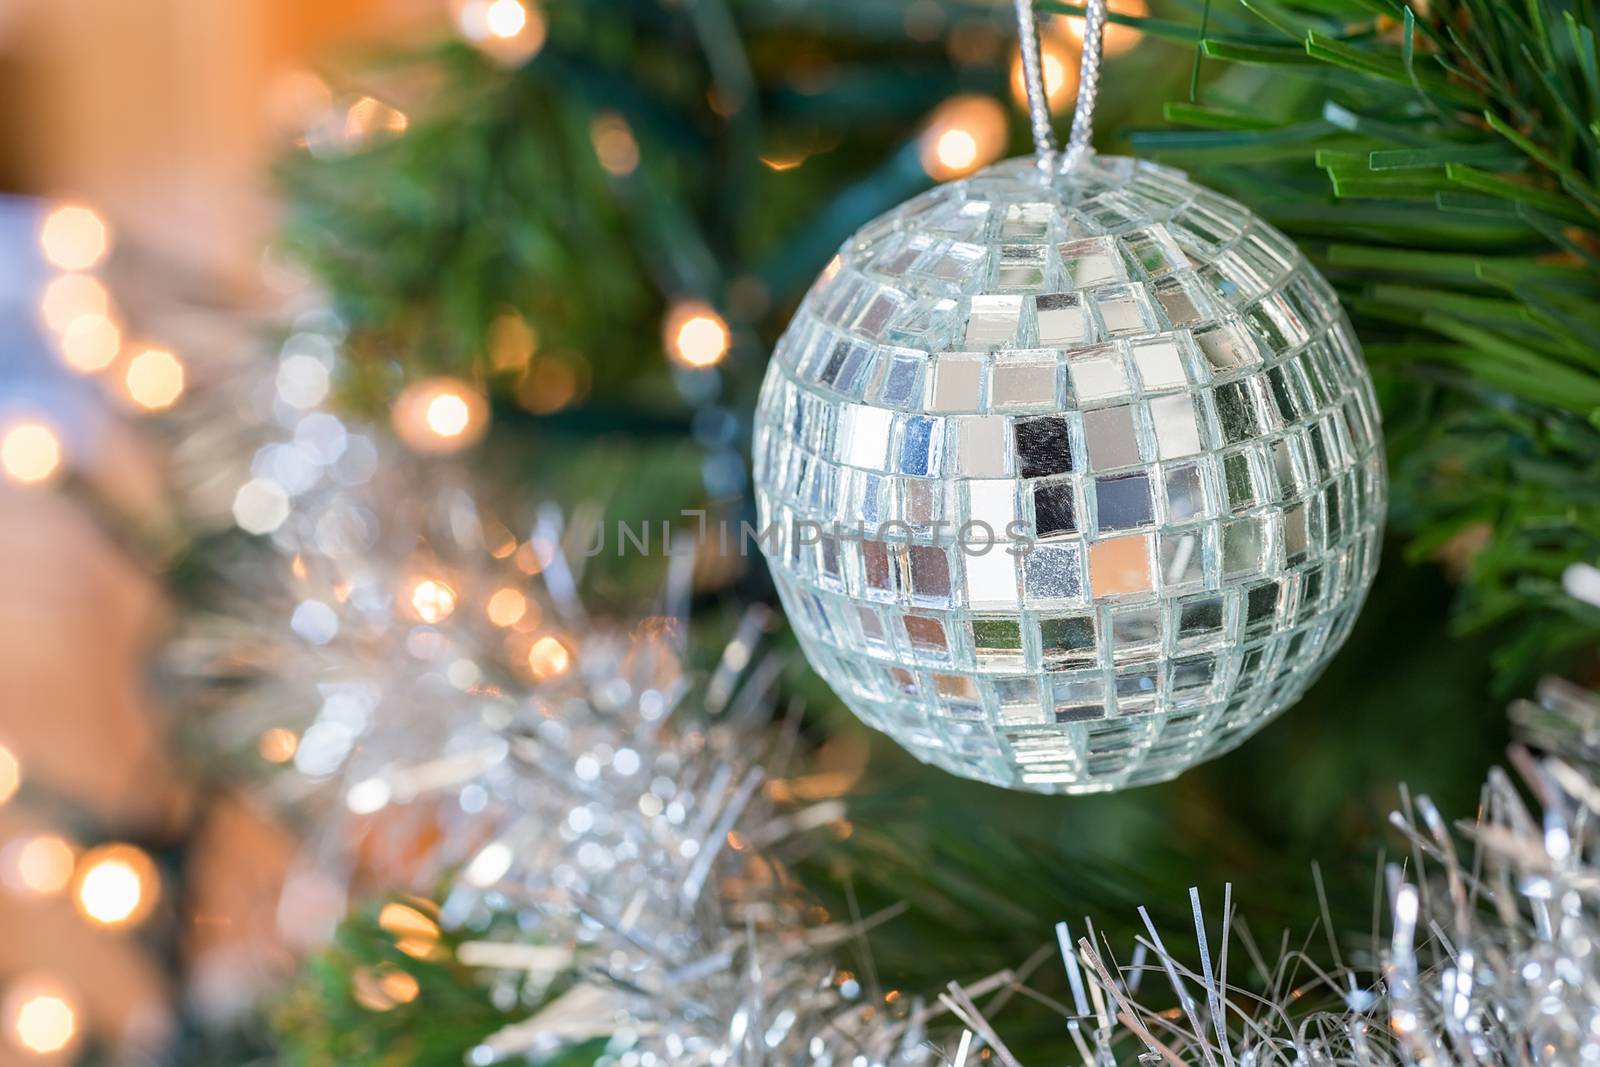 Christmas ball with mirrors hanging in tree by BenSchonewille